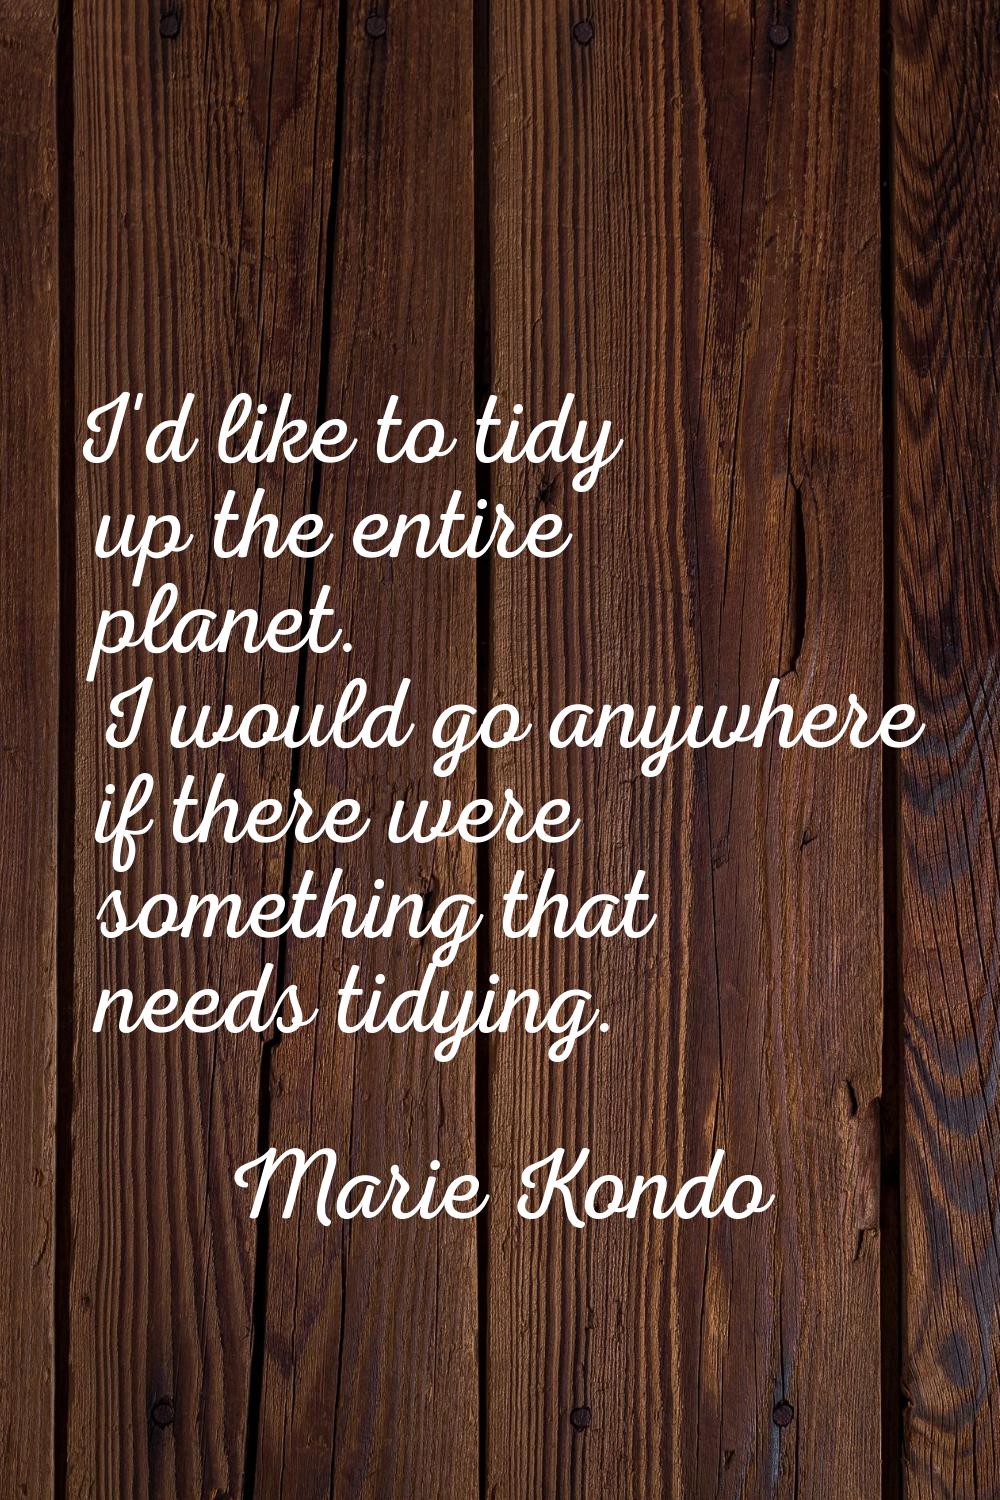 I'd like to tidy up the entire planet. I would go anywhere if there were something that needs tidyi